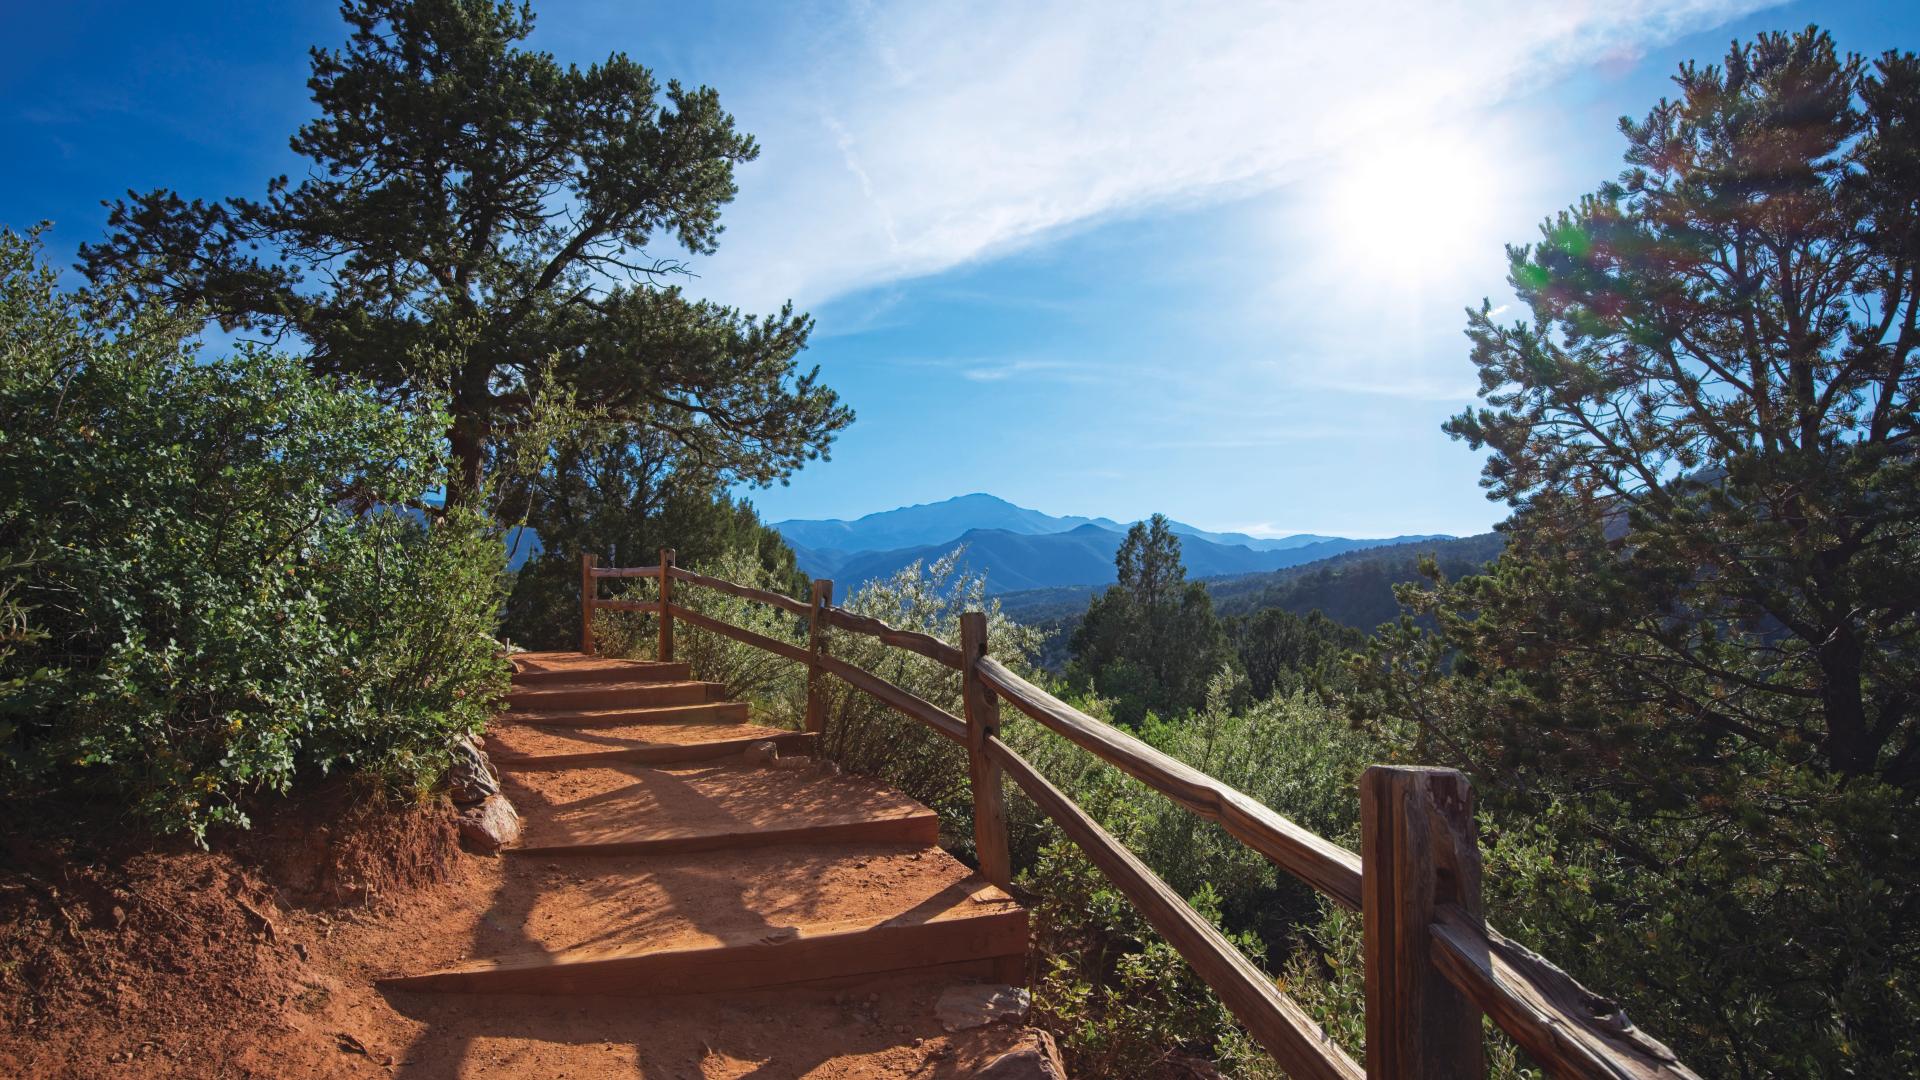 Hike the many trails through Garden of the Gods Park